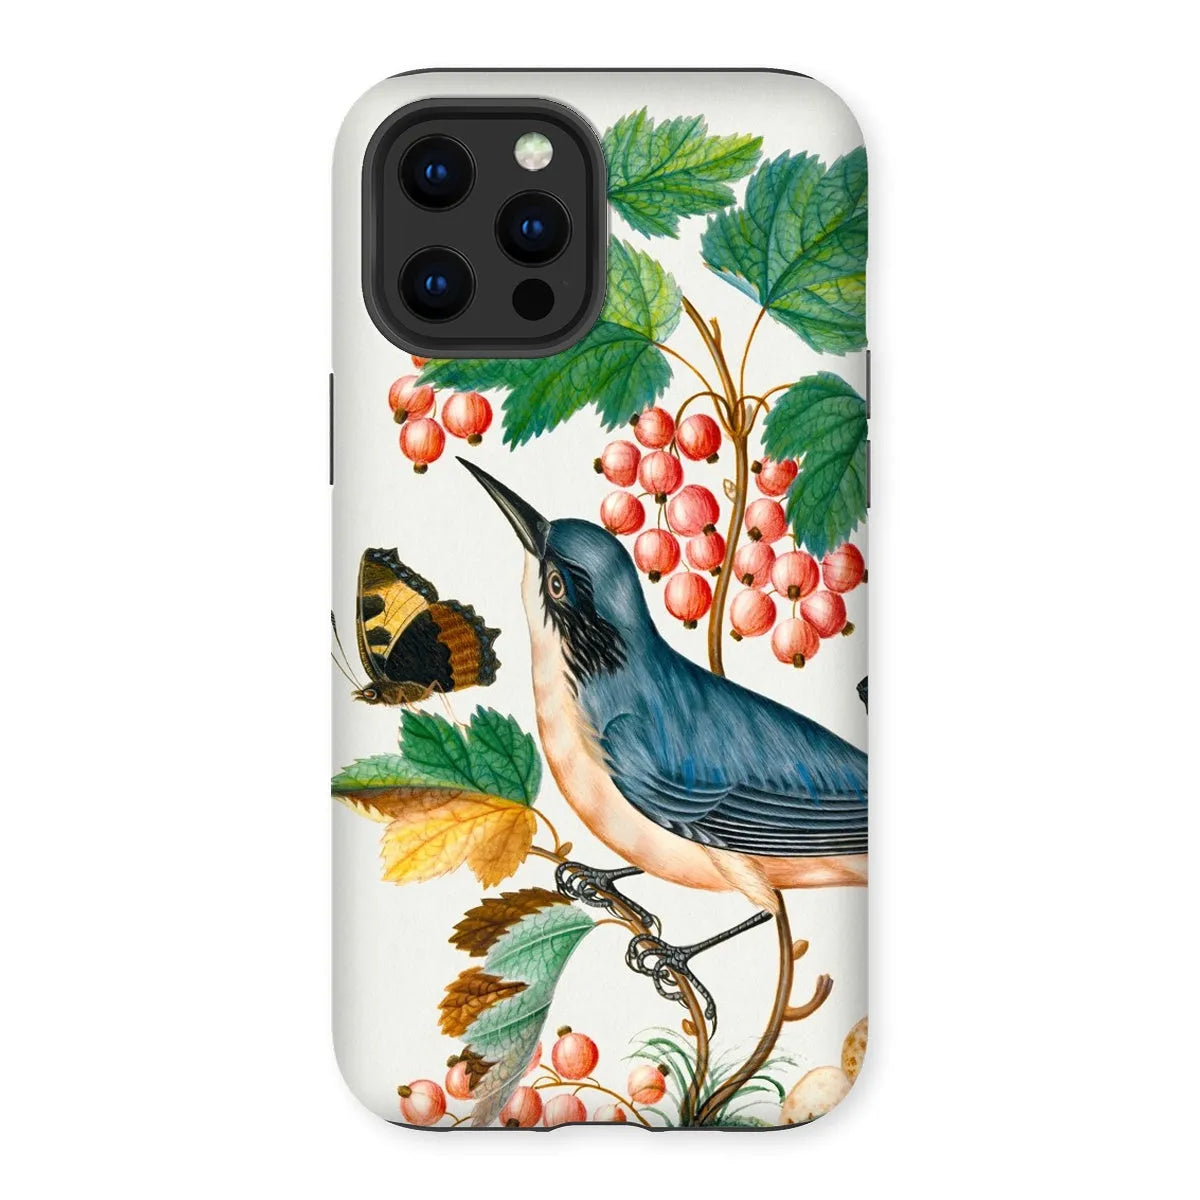 Warbler Admiral Wasps & Ants - Art Phone Case - James Bolton - Iphone 13 Pro Max / Matte - Mobile Phone Cases